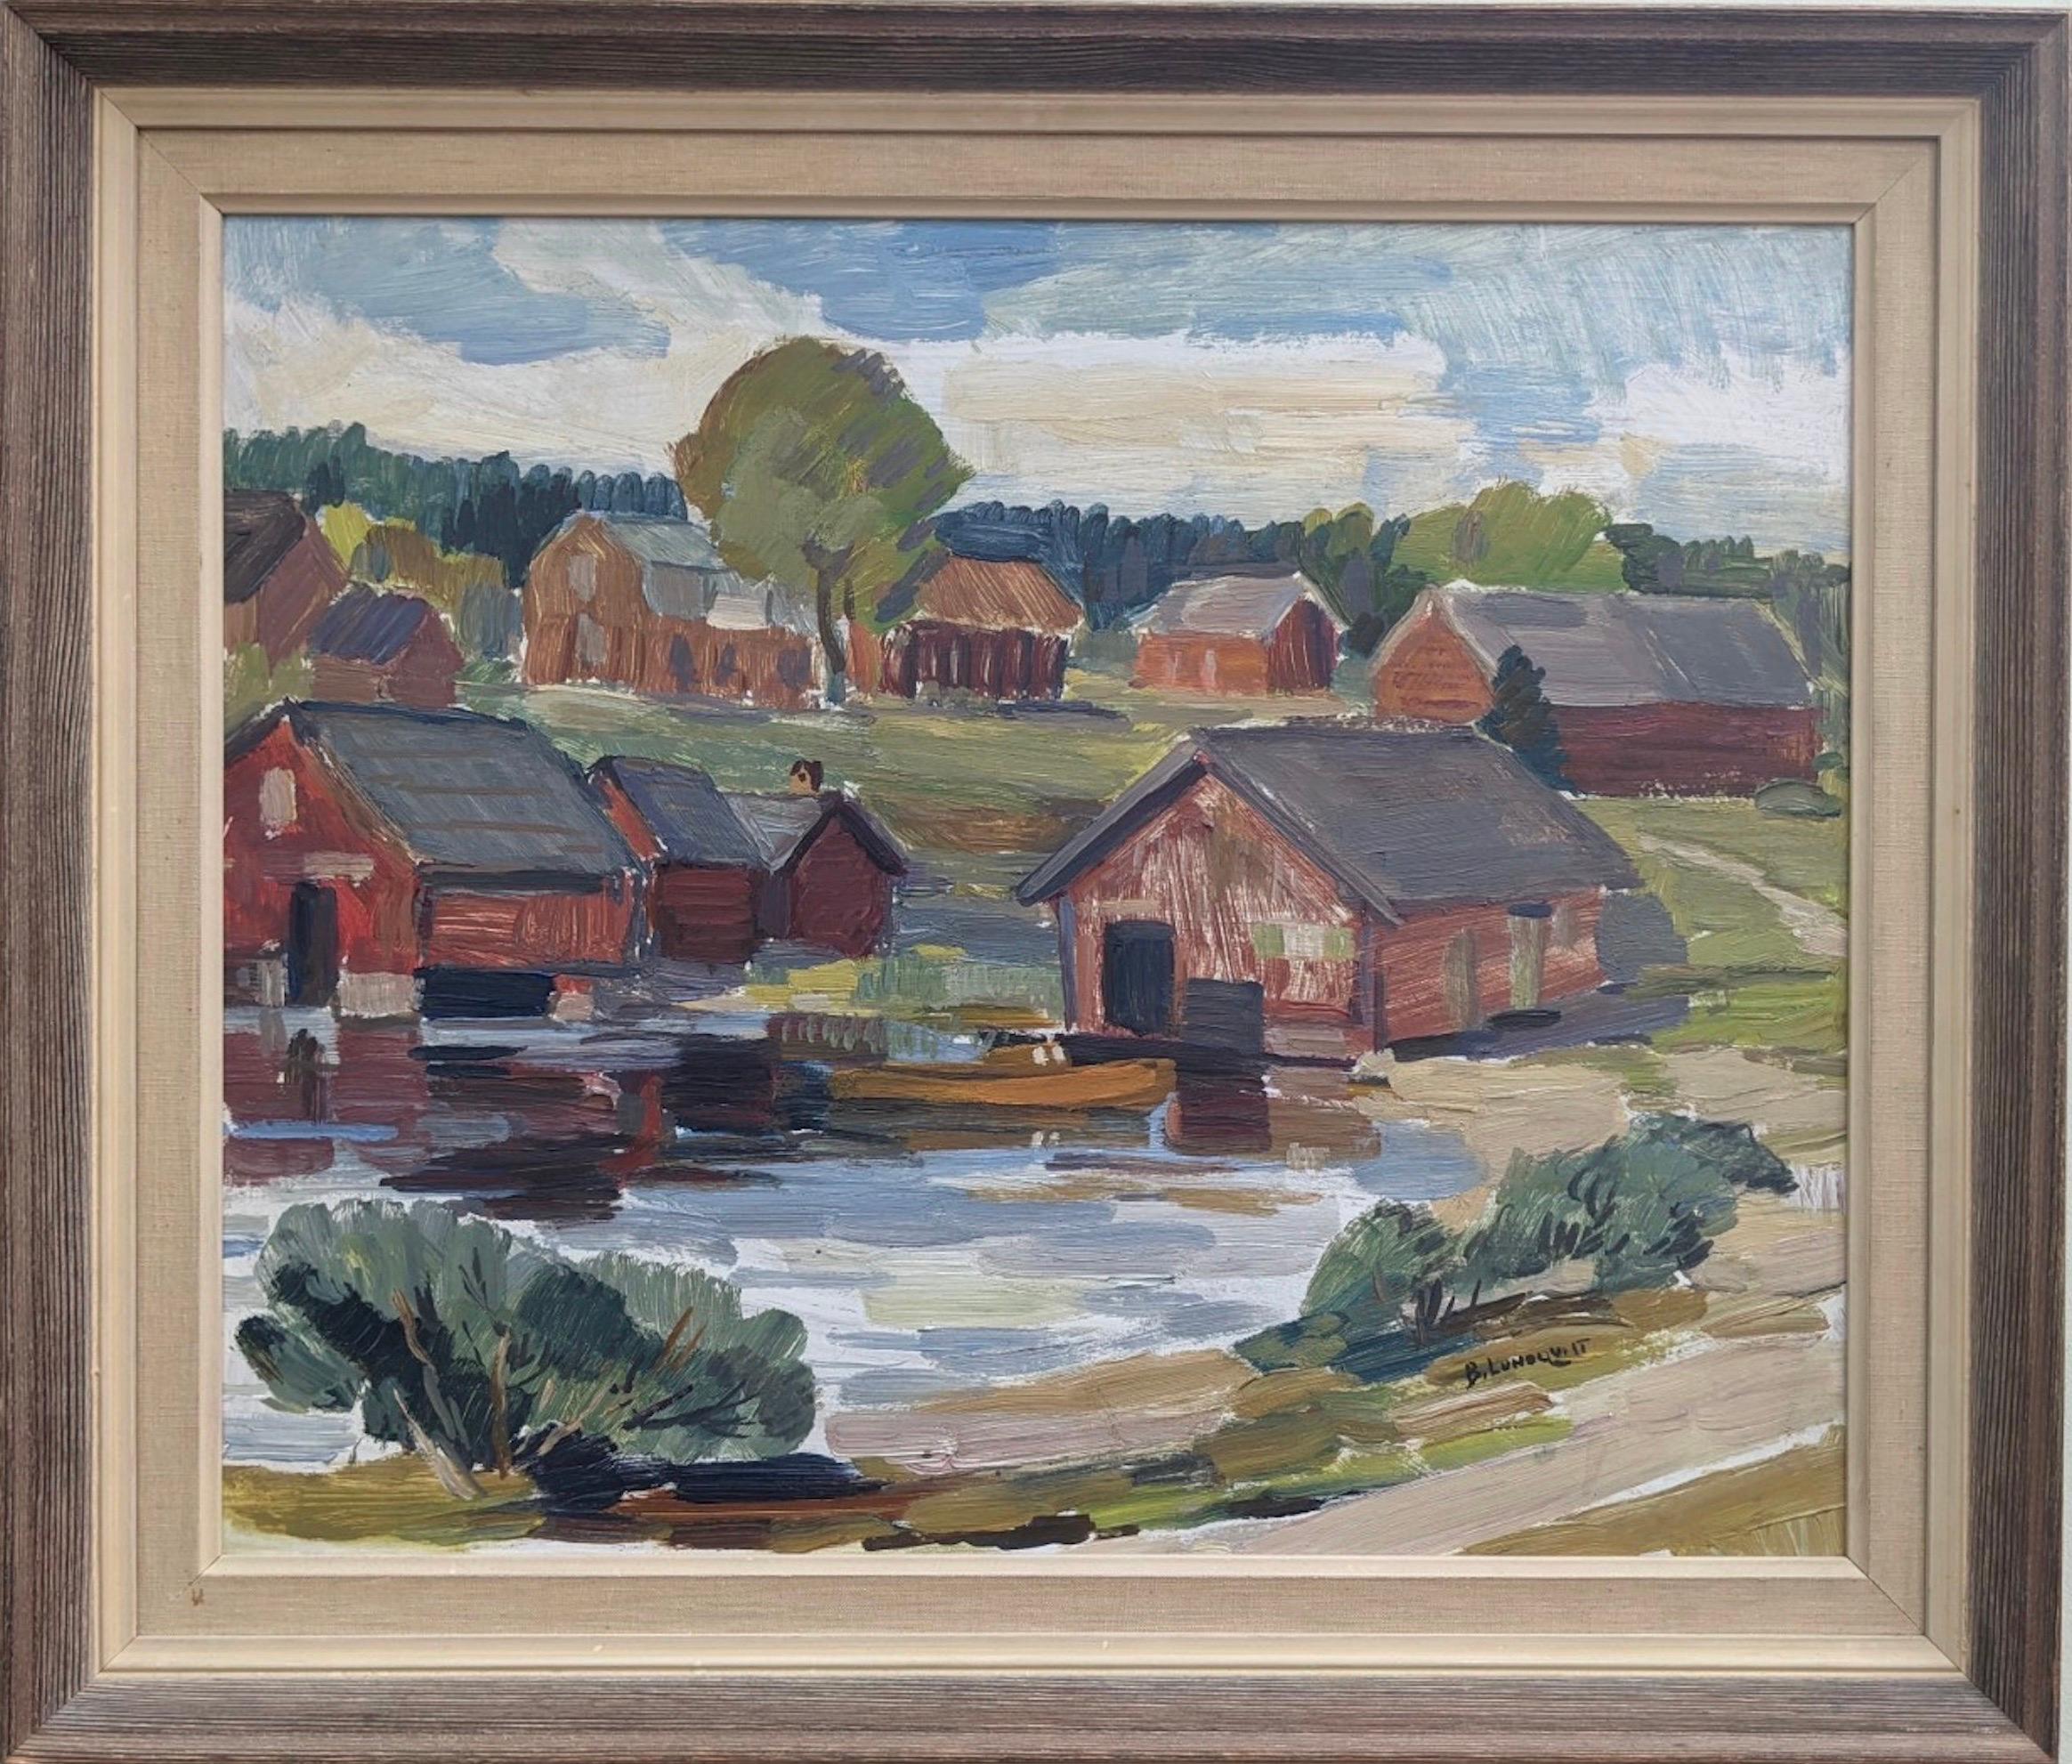 Unknown Landscape Painting - Vintage Mid Century Modern Swedish Landscape Framed Oil Painting - Lake Houses